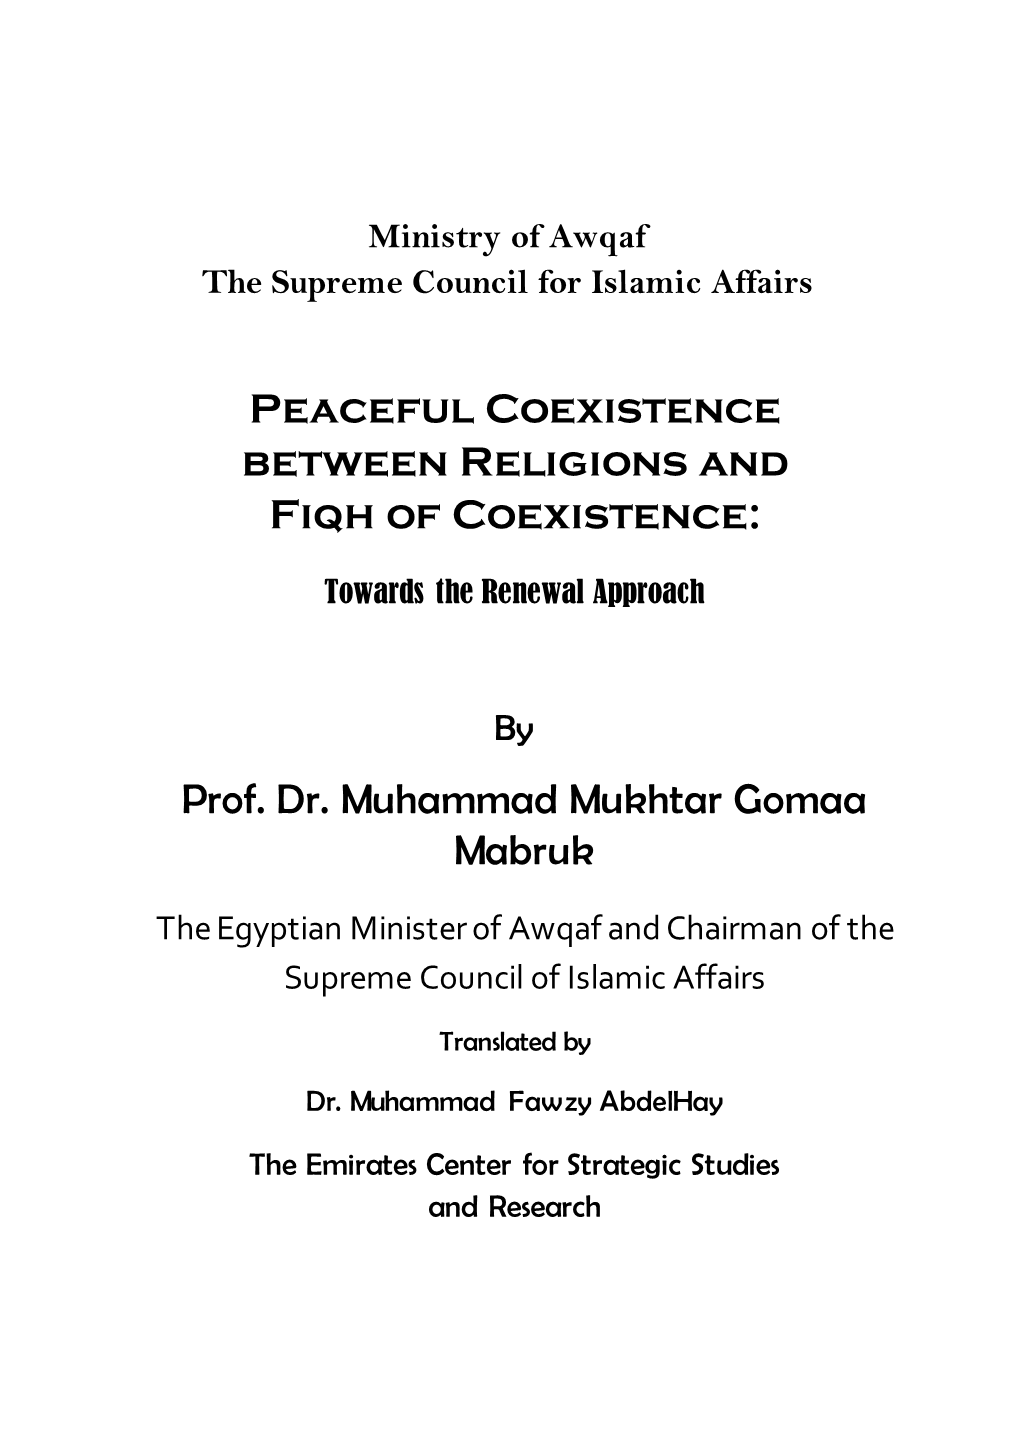 Peaceful Coexistence Between Religions and Fiqh of Coexistence